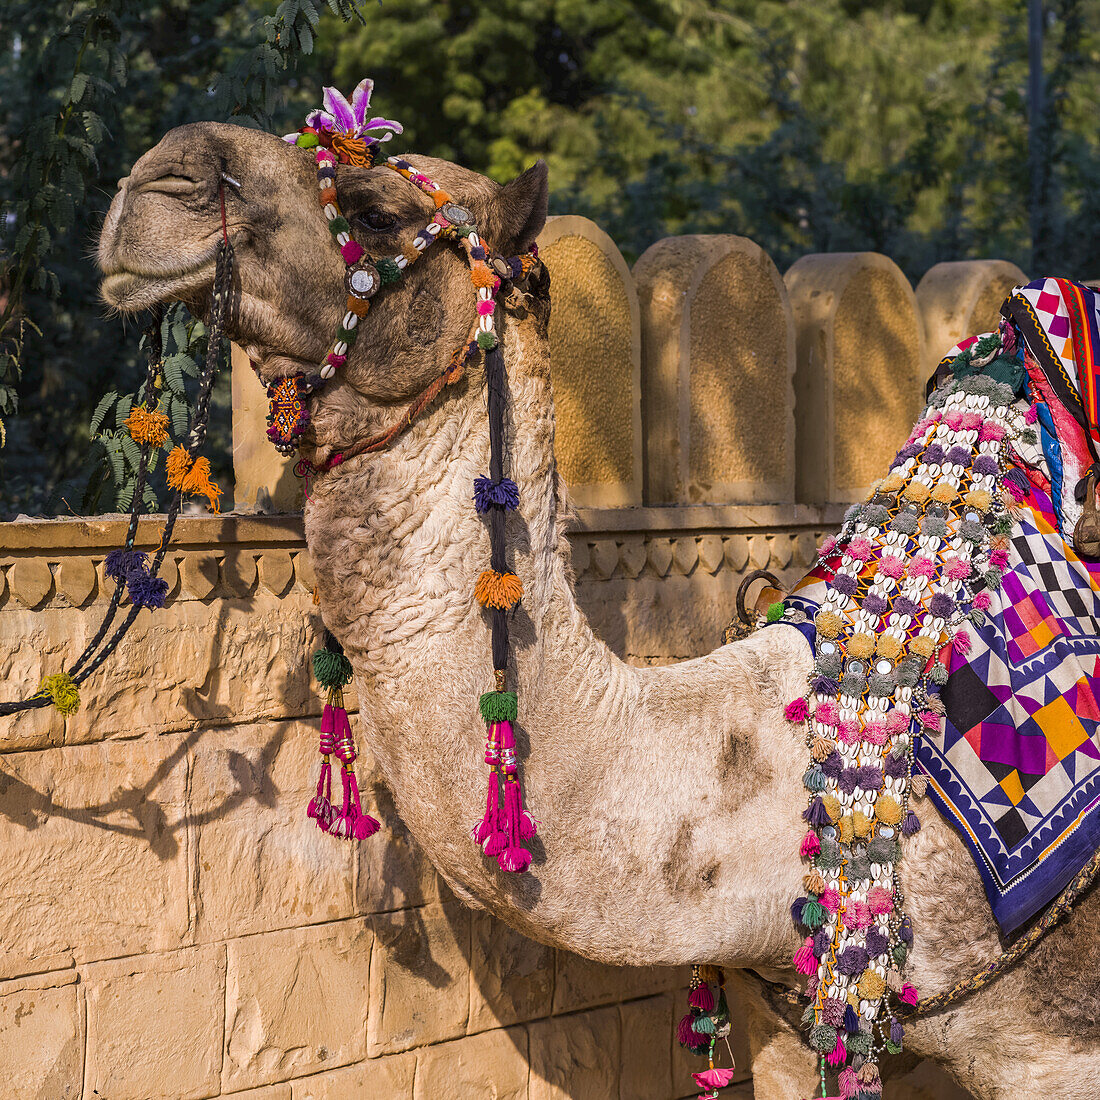 Close-up of a decorated camel with colourful  tassels and fabric; Jaisalmer, Rajasthan, India